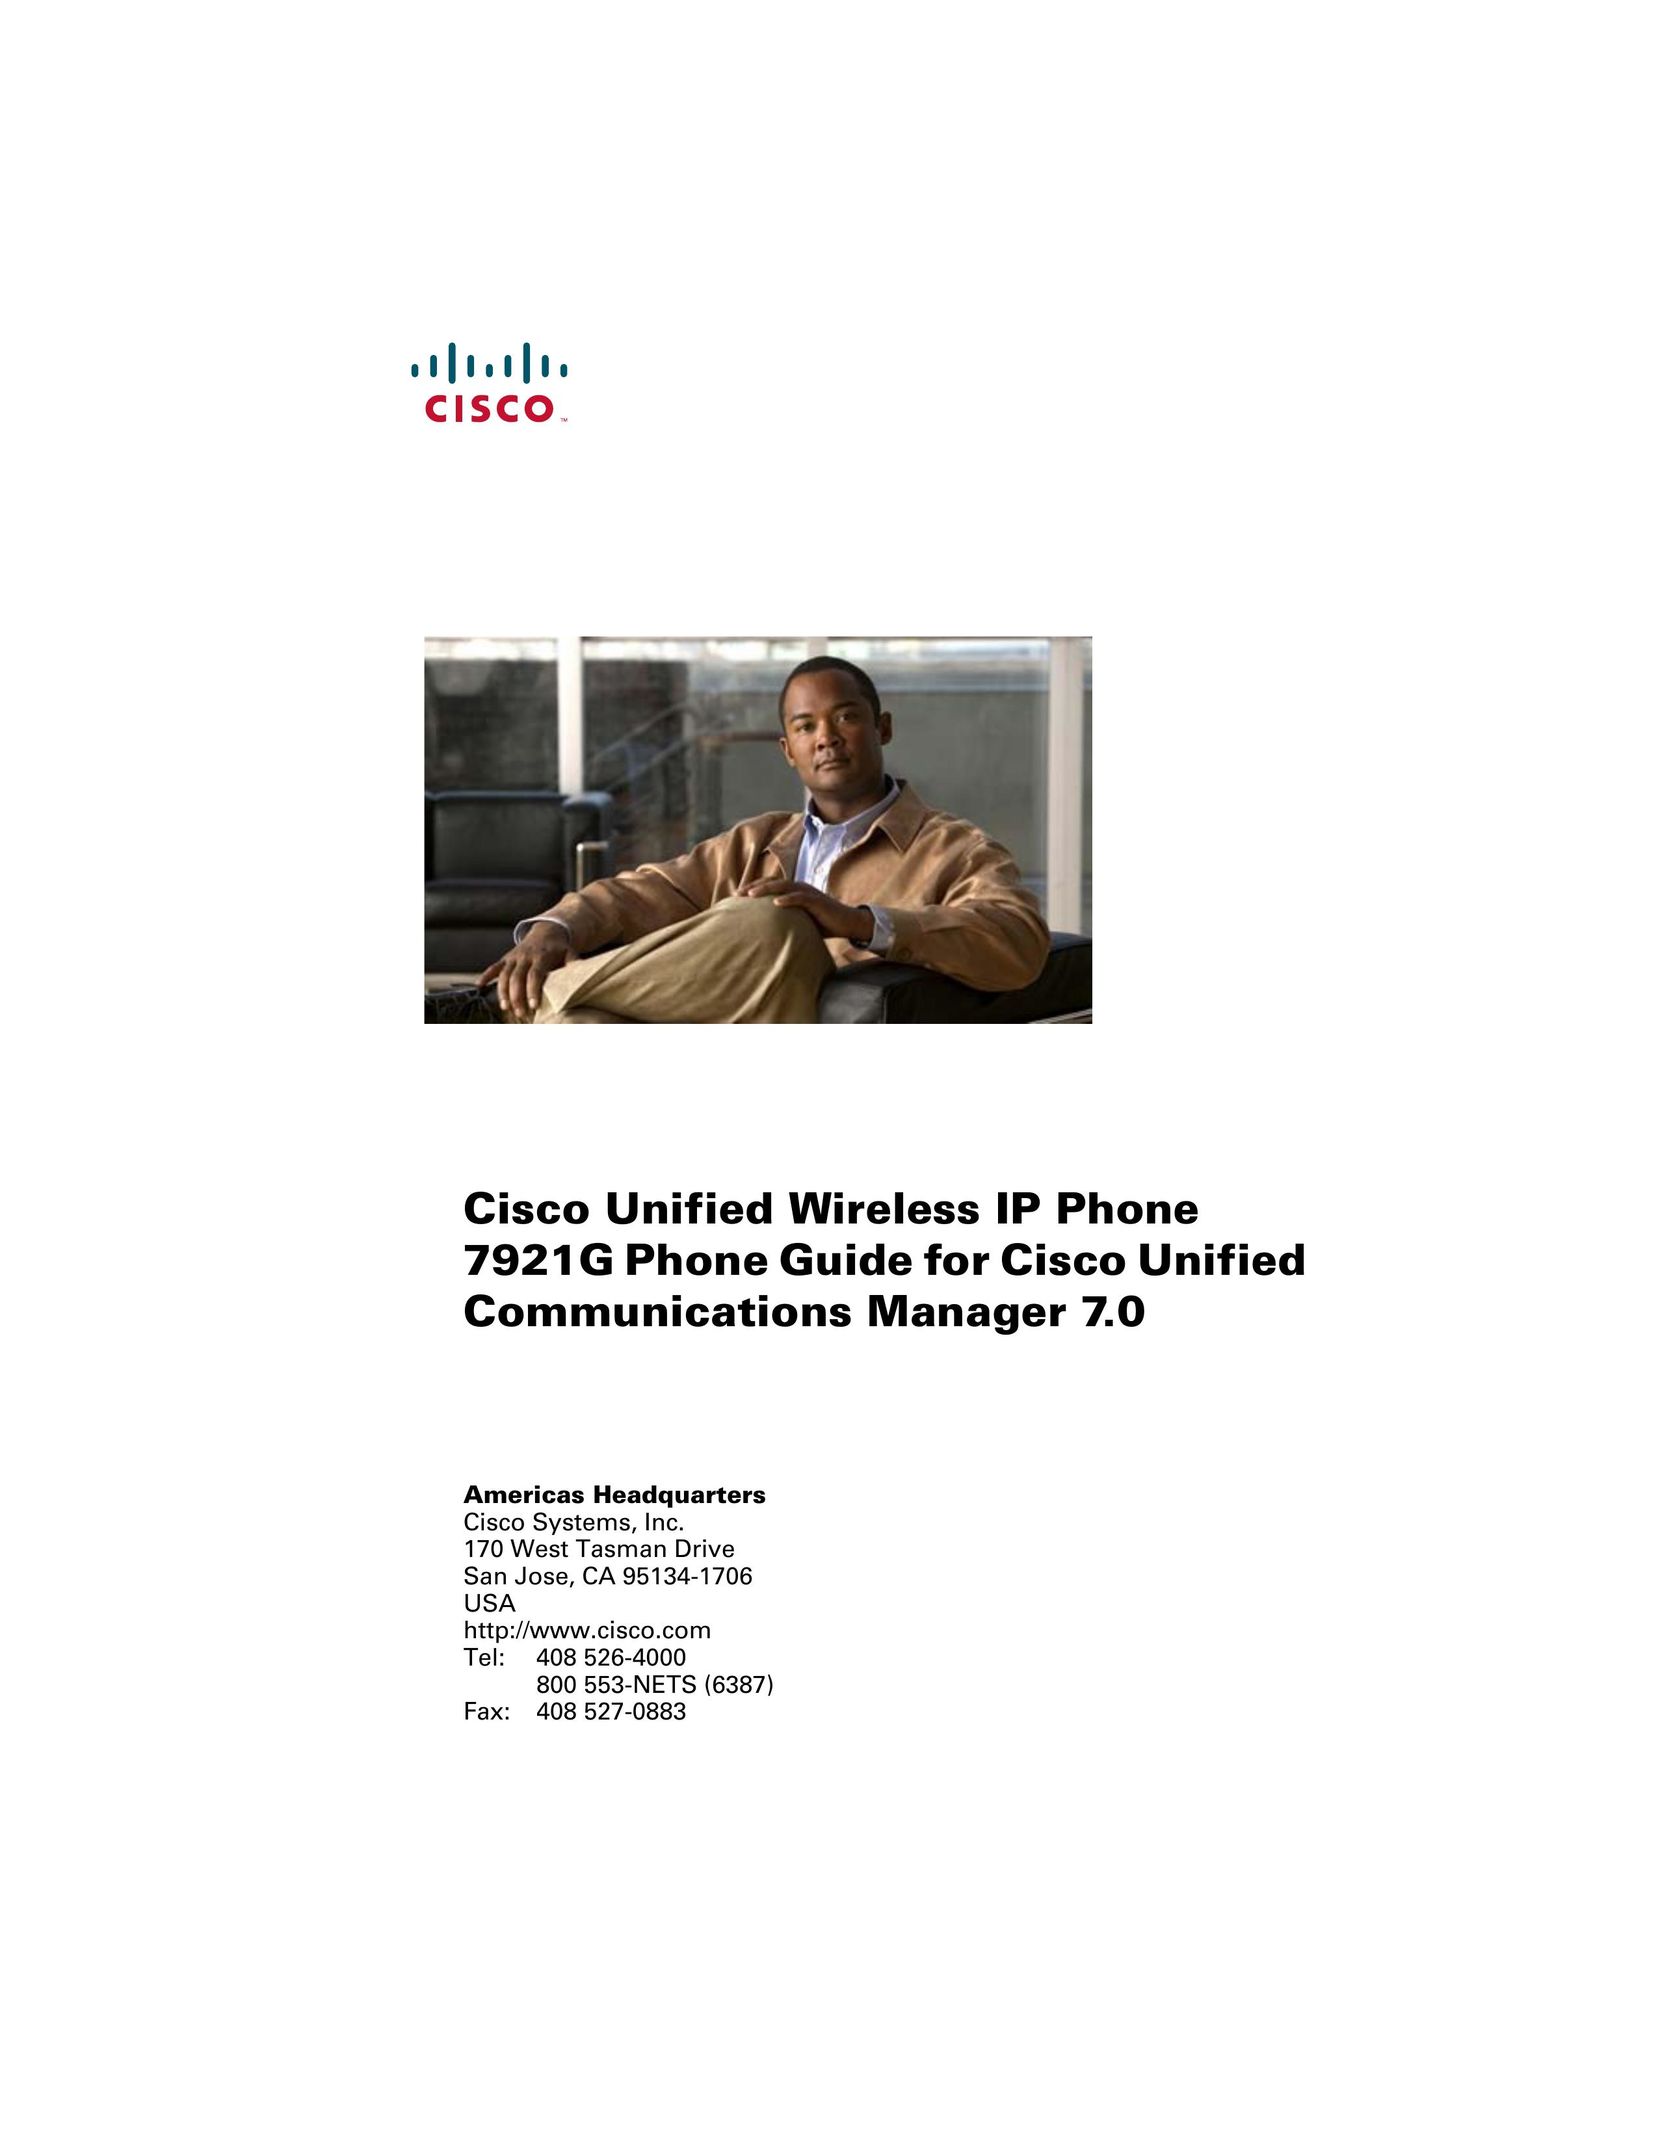 Cisco Systems CP7921GAK9RF Conference Phone User Manual